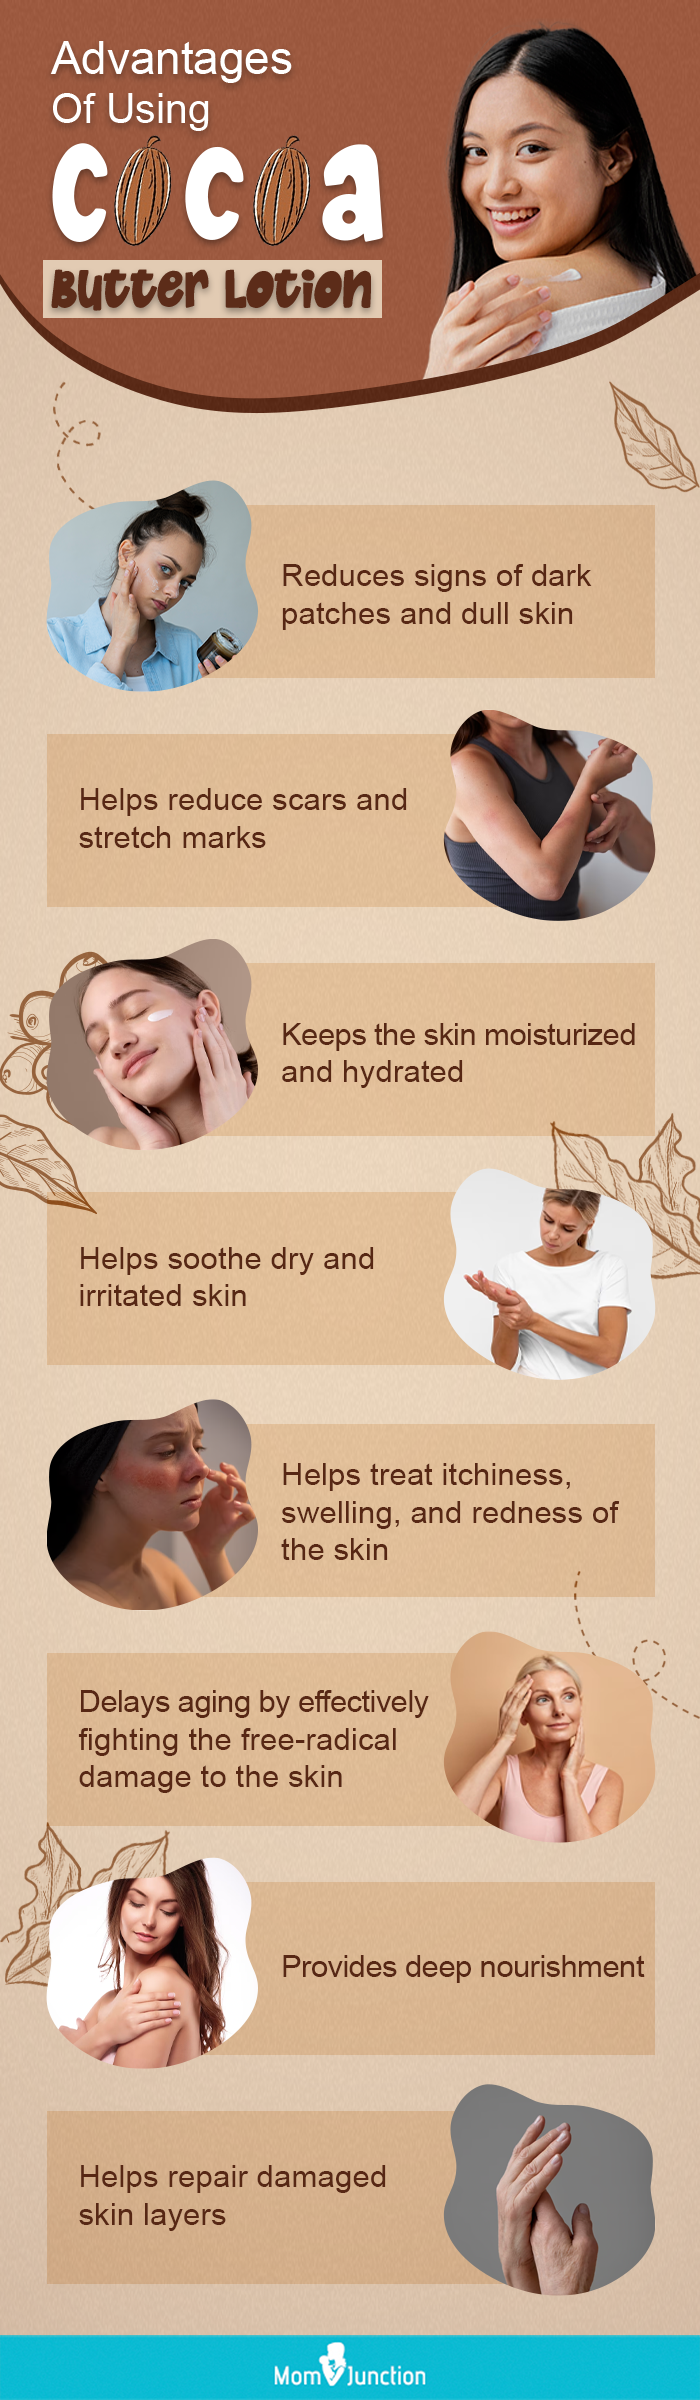 Advantages Of Using Cocoa Butter Lotion (infographic)